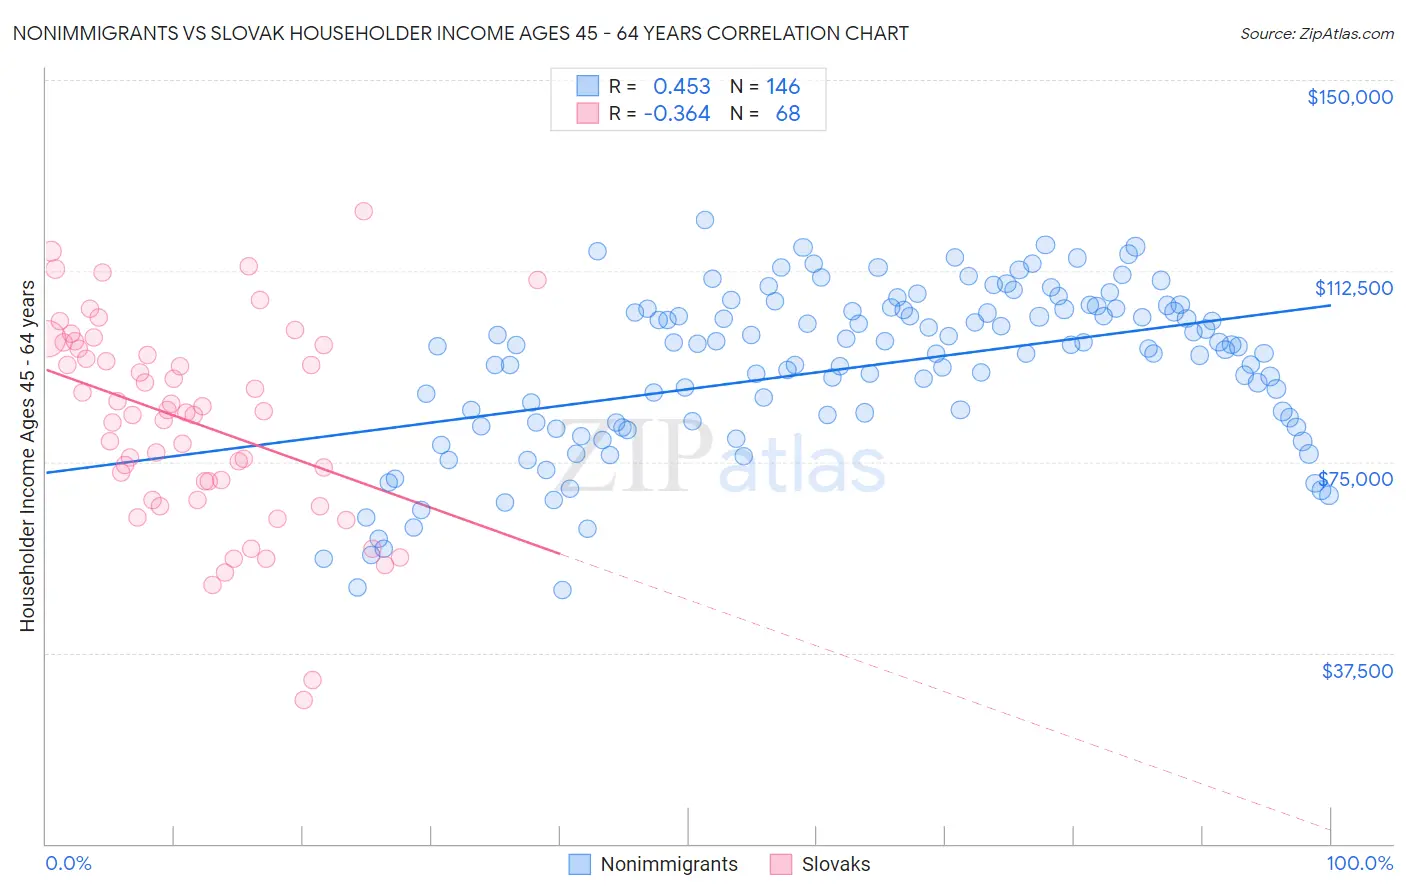 Nonimmigrants vs Slovak Householder Income Ages 45 - 64 years